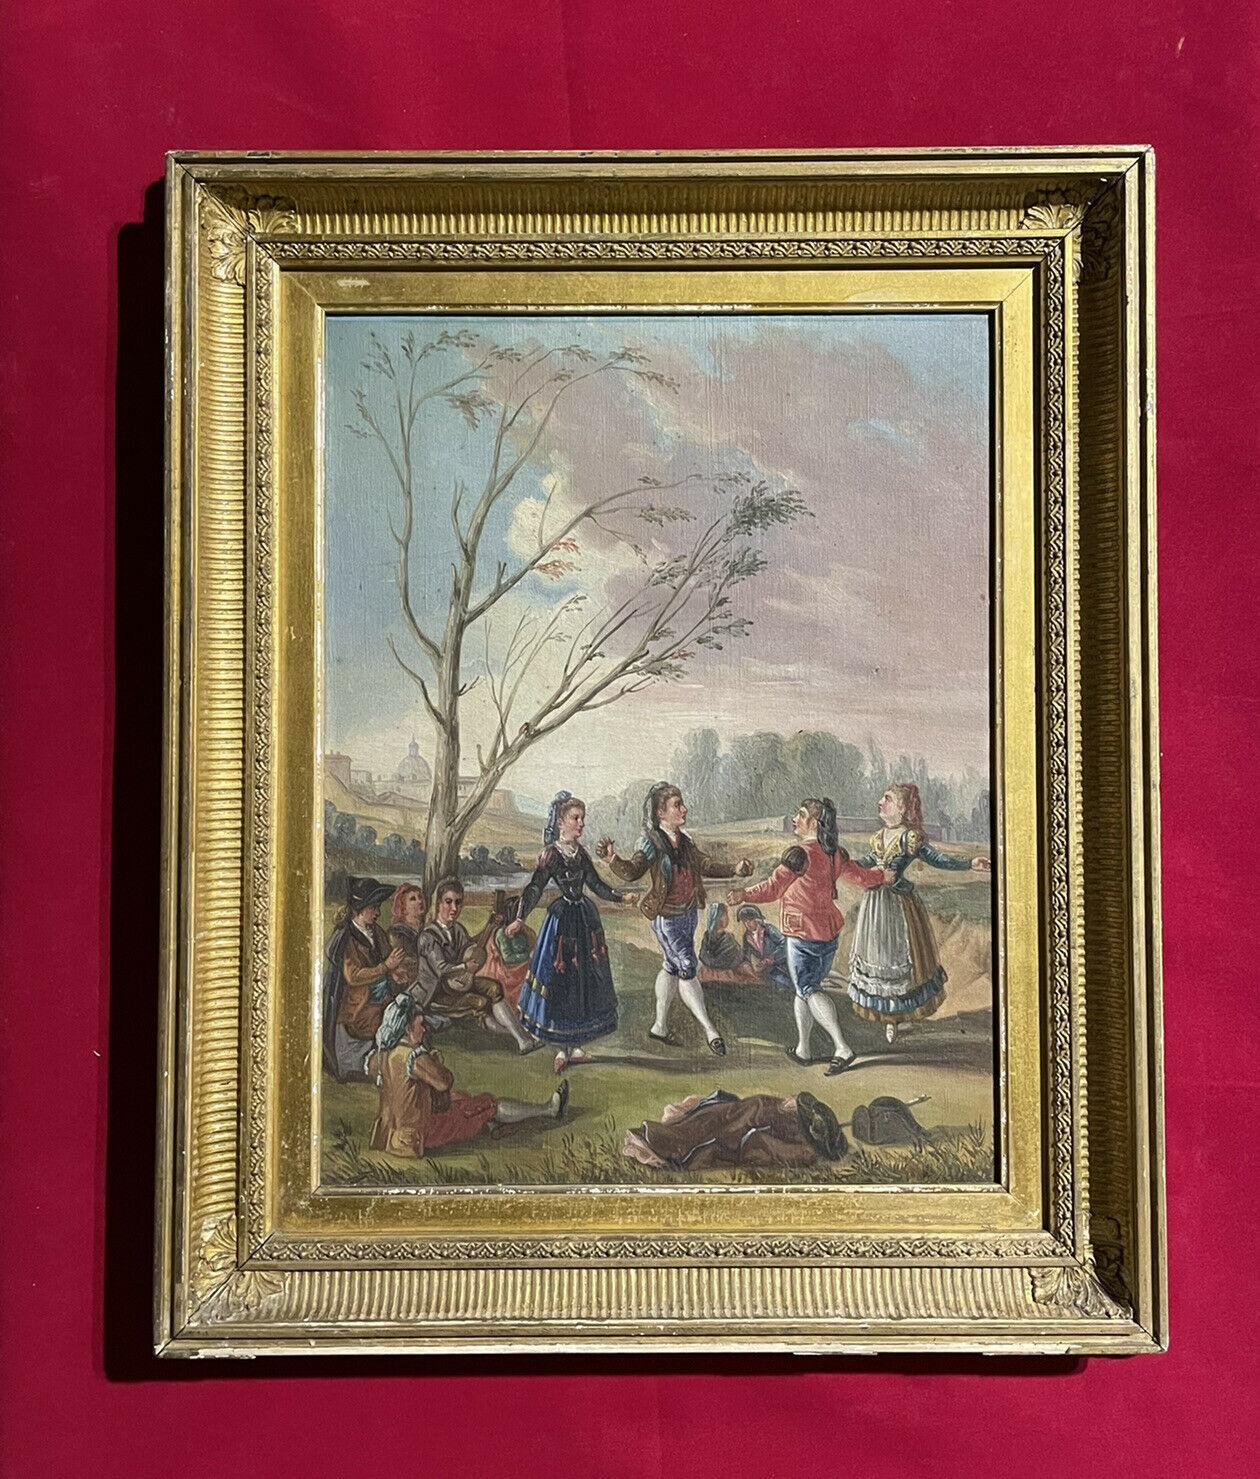 EARLY 19TH CENTURY ITALIAN OIL PAINTING - FIGURES DANCING MERRYMAKING - GILT FRM 1